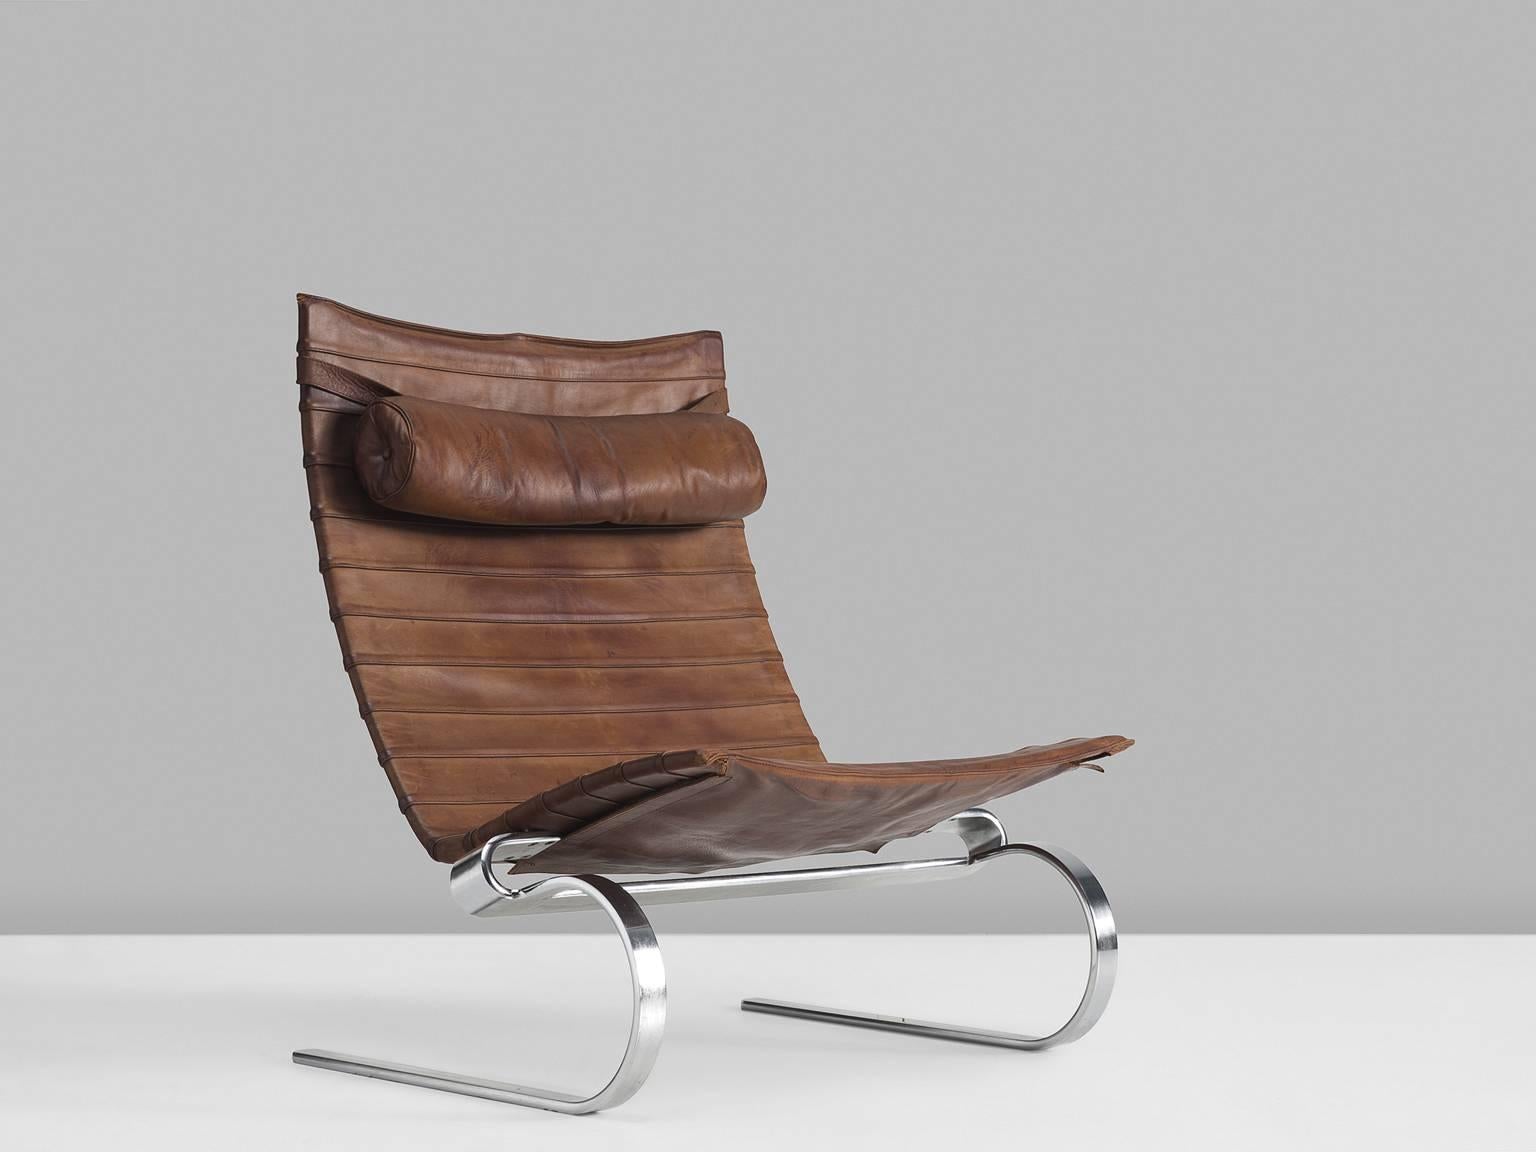 Lounge chair PK20, in stainless steel and brown to cognac leather, by Poul Kjærholm for E. Kold Christensen, Denmark, 1968.

Cantilevered easy chair designed by Poul Kjærholm for E. Kold Christensen. This reclining chair is made of matte,